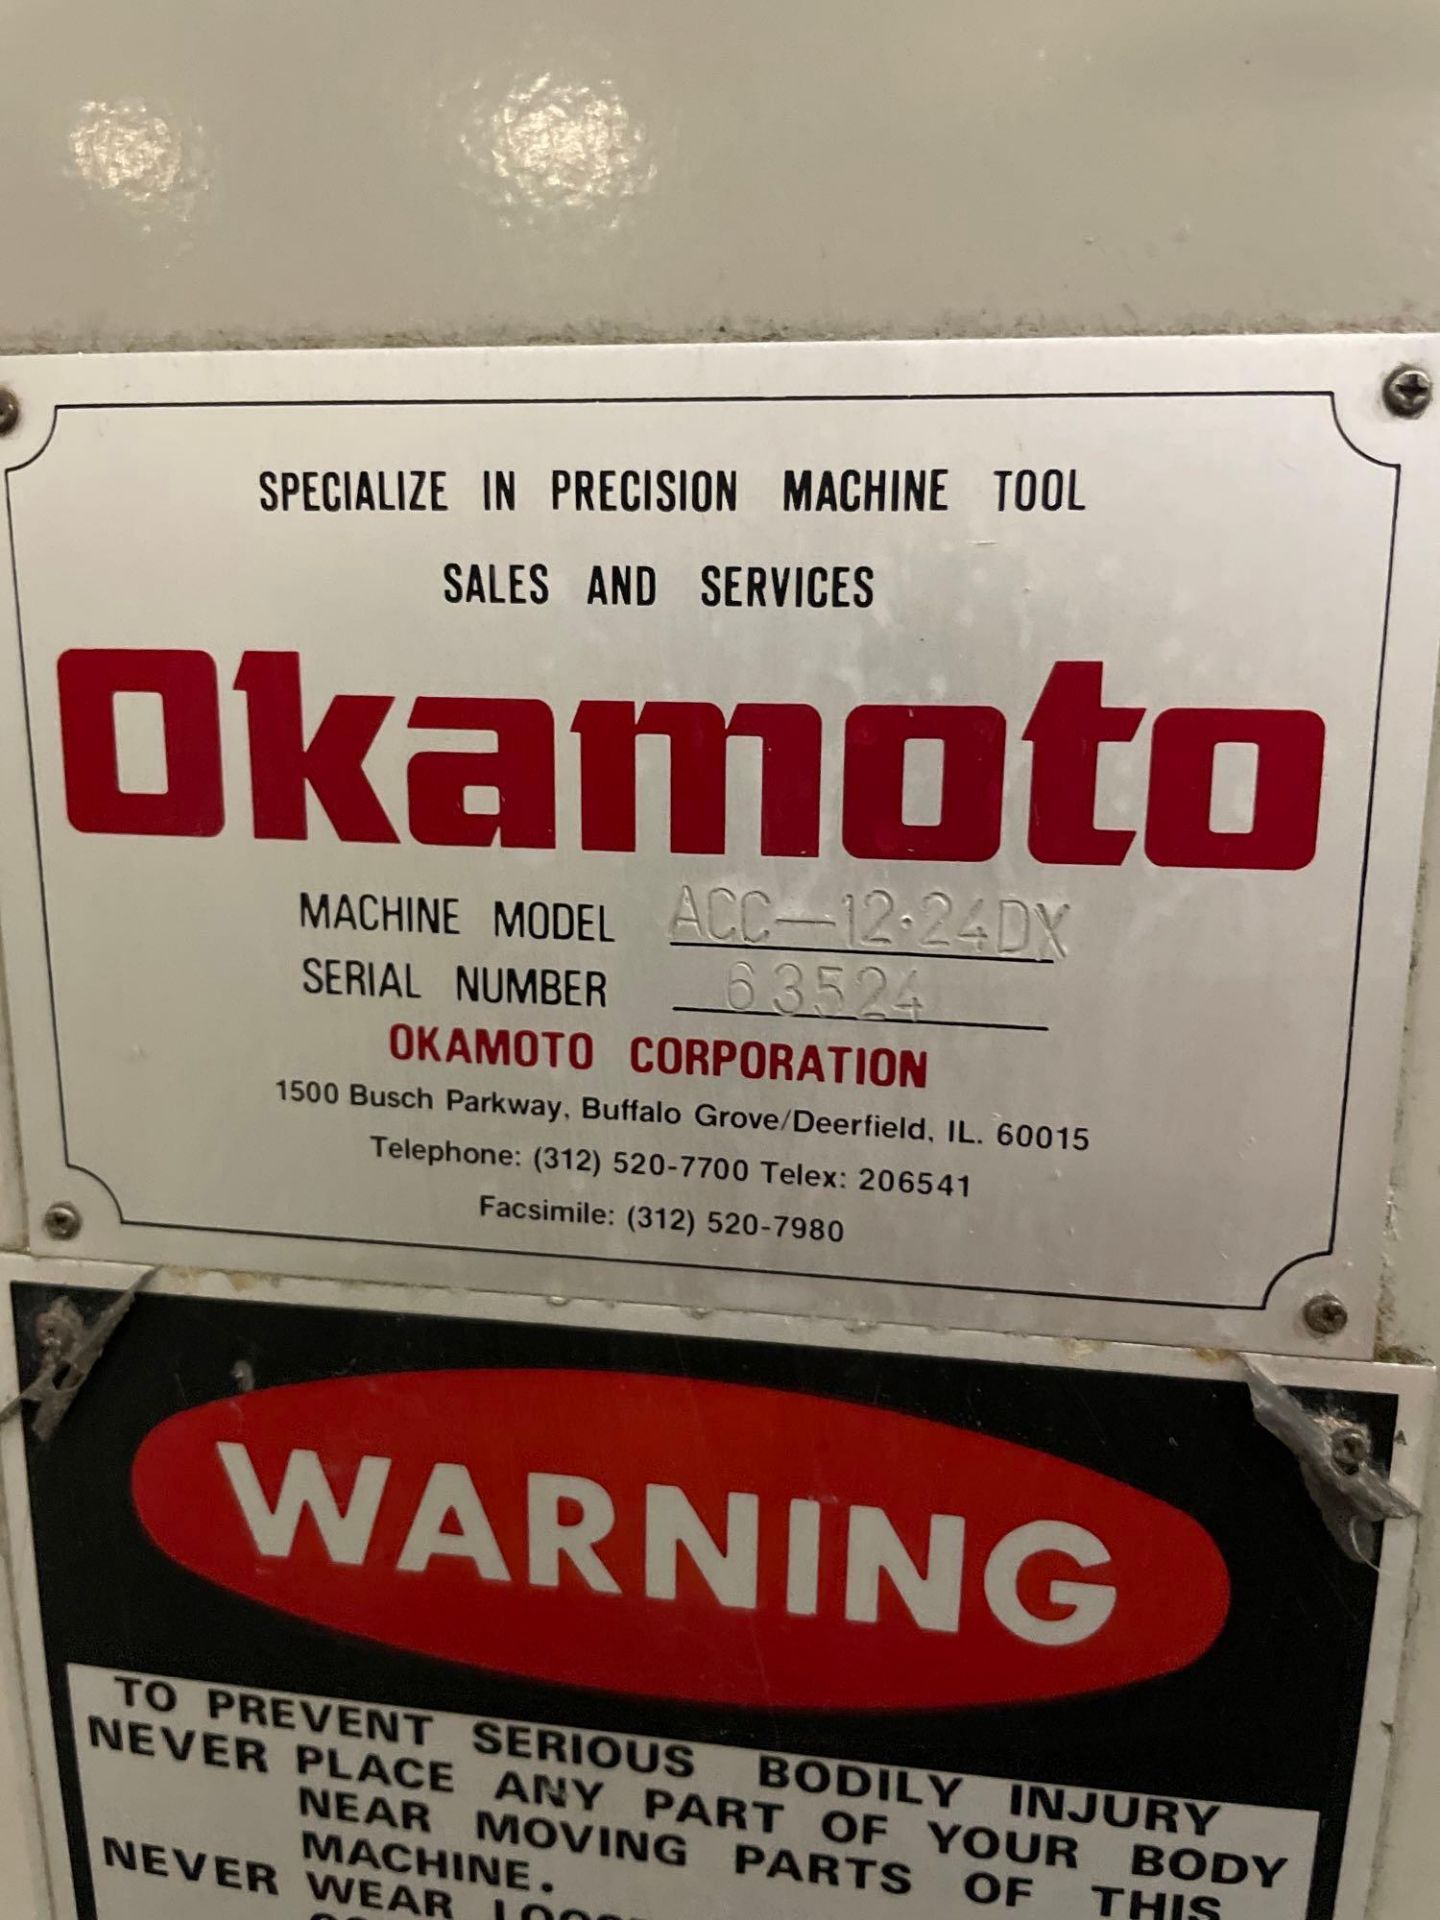 Okamoto ACC12-24DX Automatic Surface Grinder, s/n 63524 - Image 8 of 8